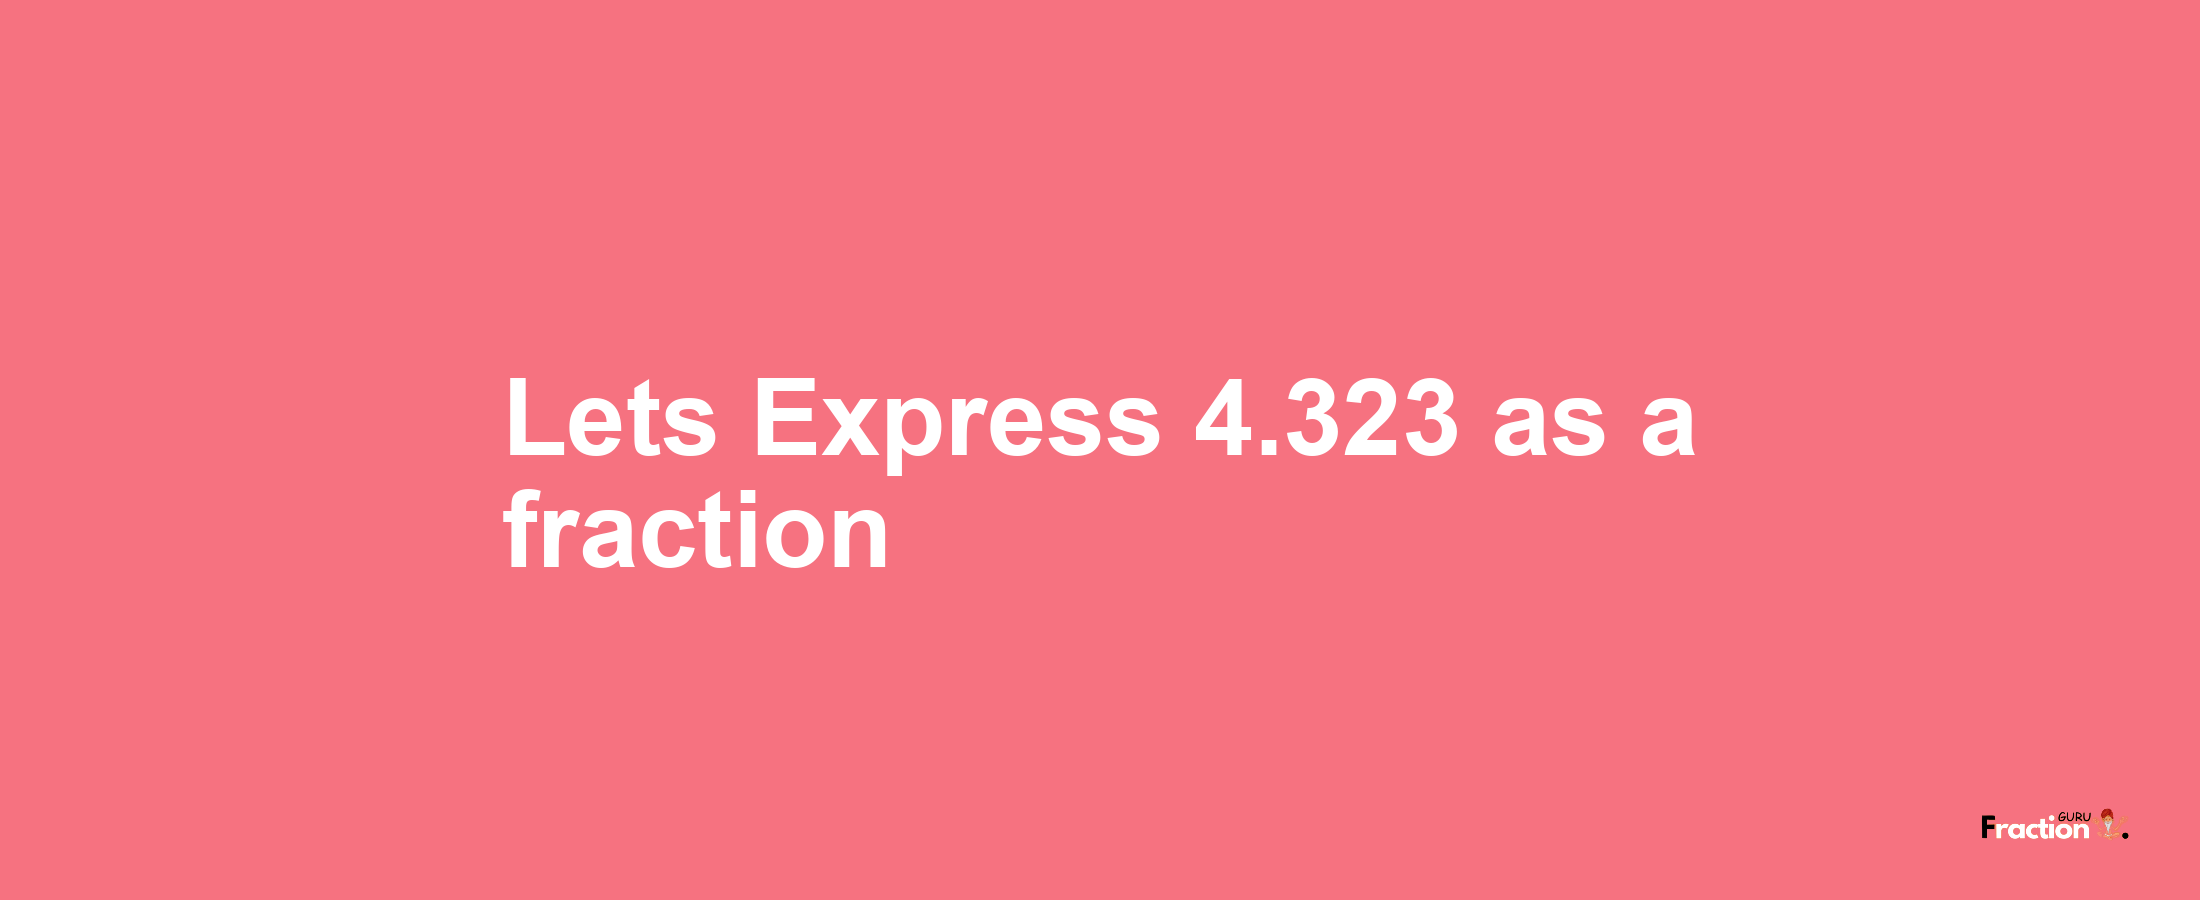 Lets Express 4.323 as afraction